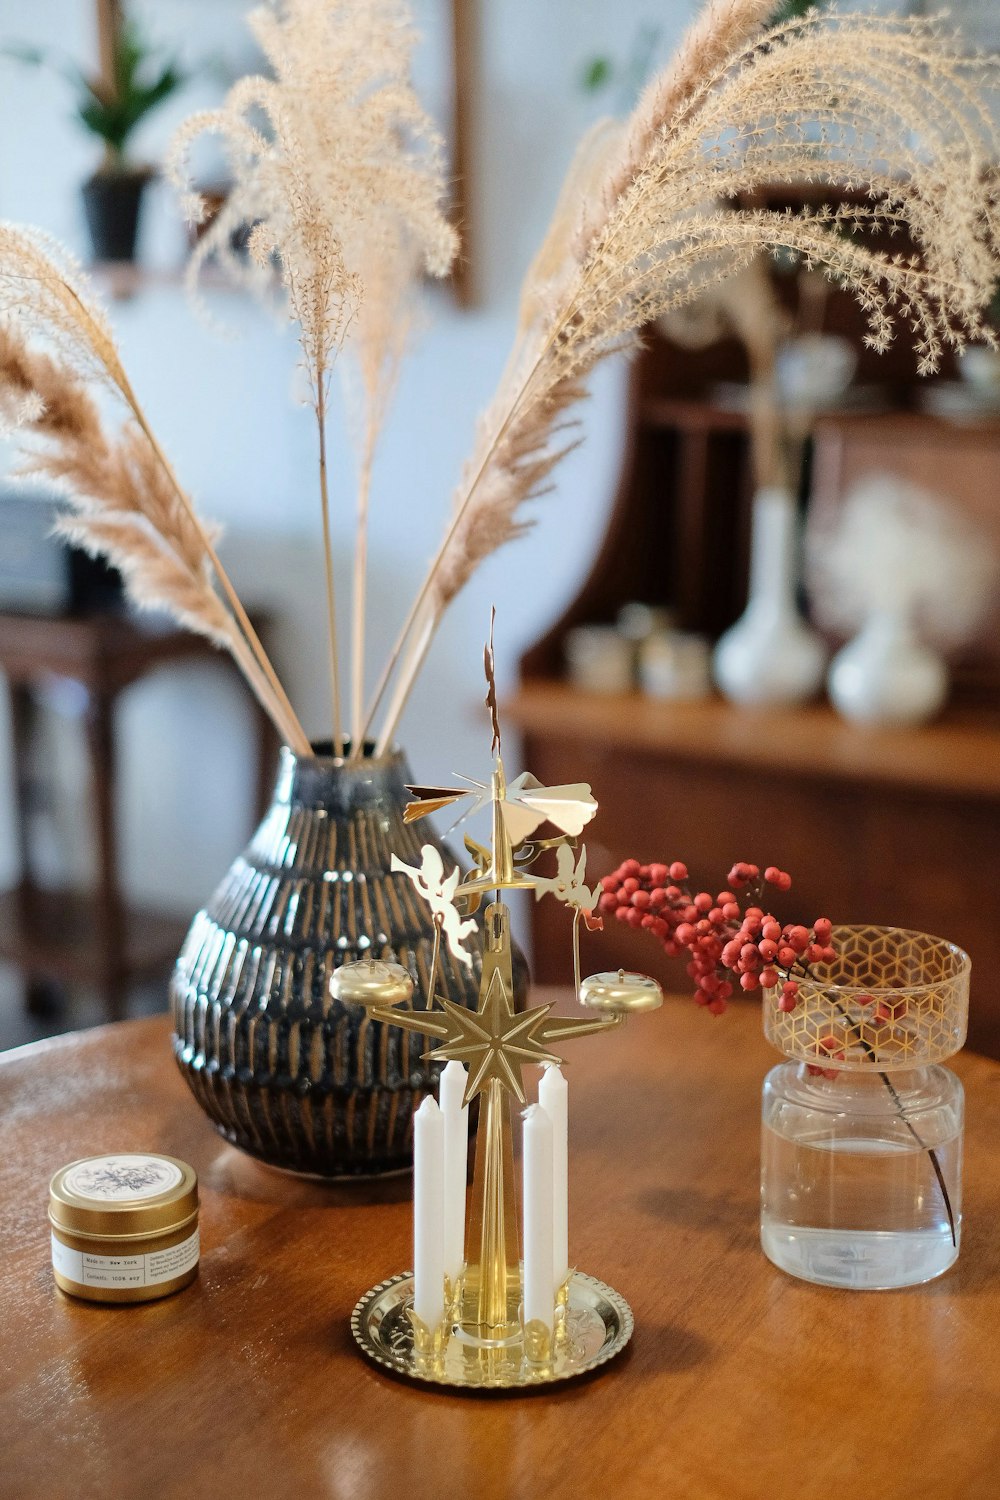 brown and gray flower vase beside glass decors